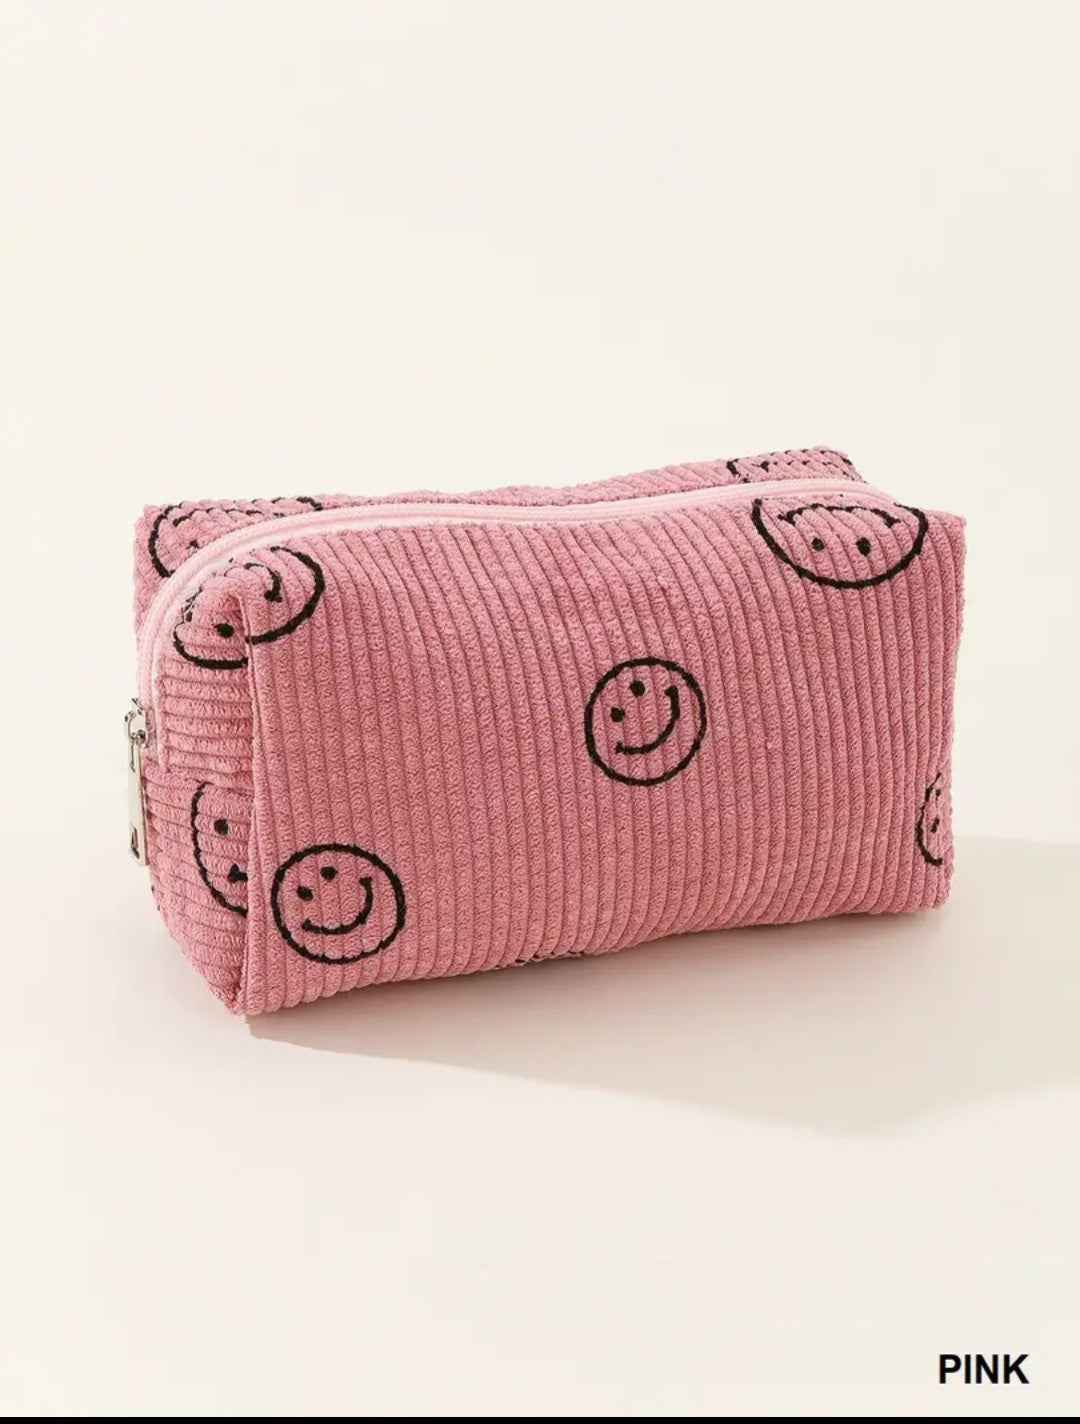 Smiley Corduroy Pouch